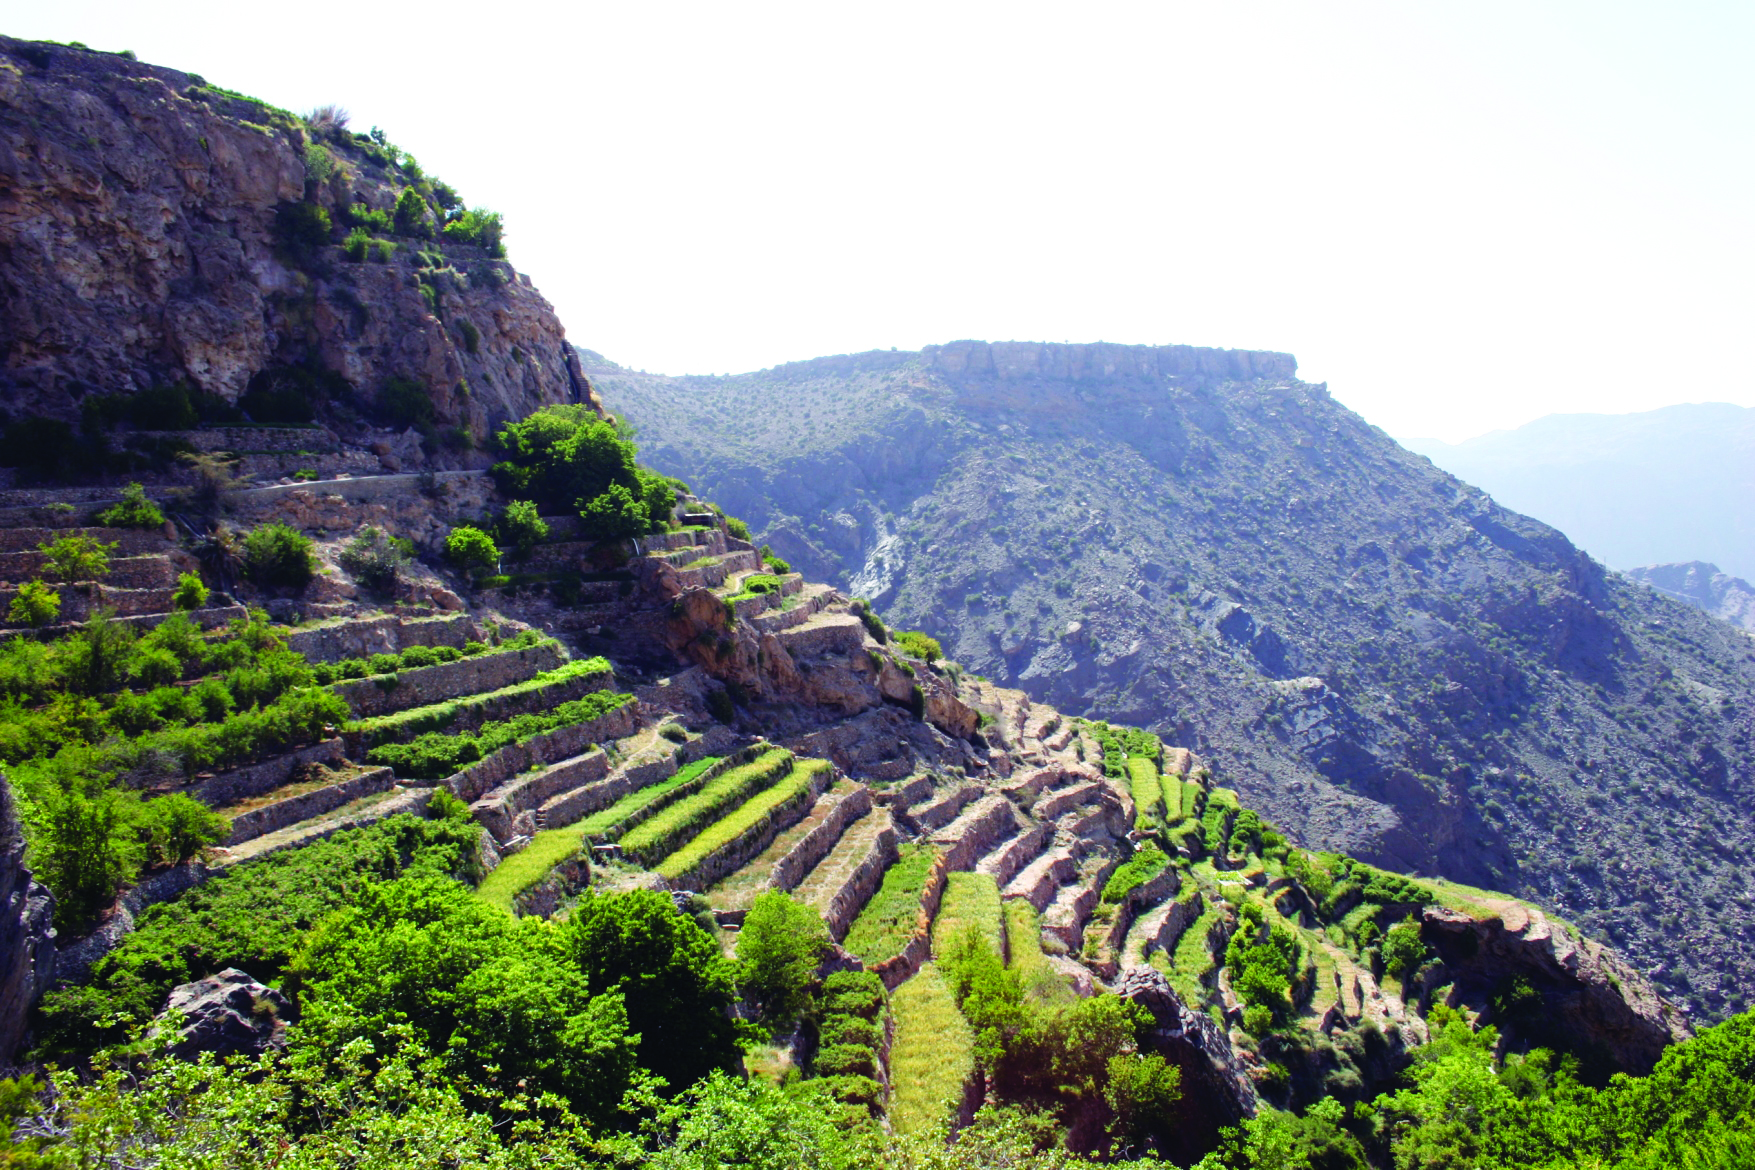 Over 225,000 people visited Jebel Akhdar in 2018